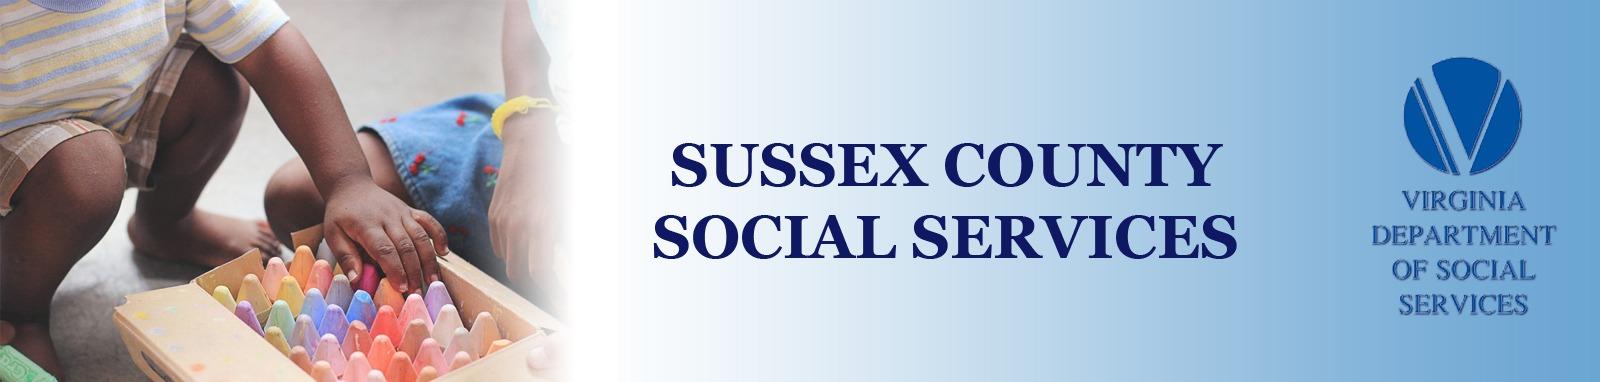 Sussex County Social Services